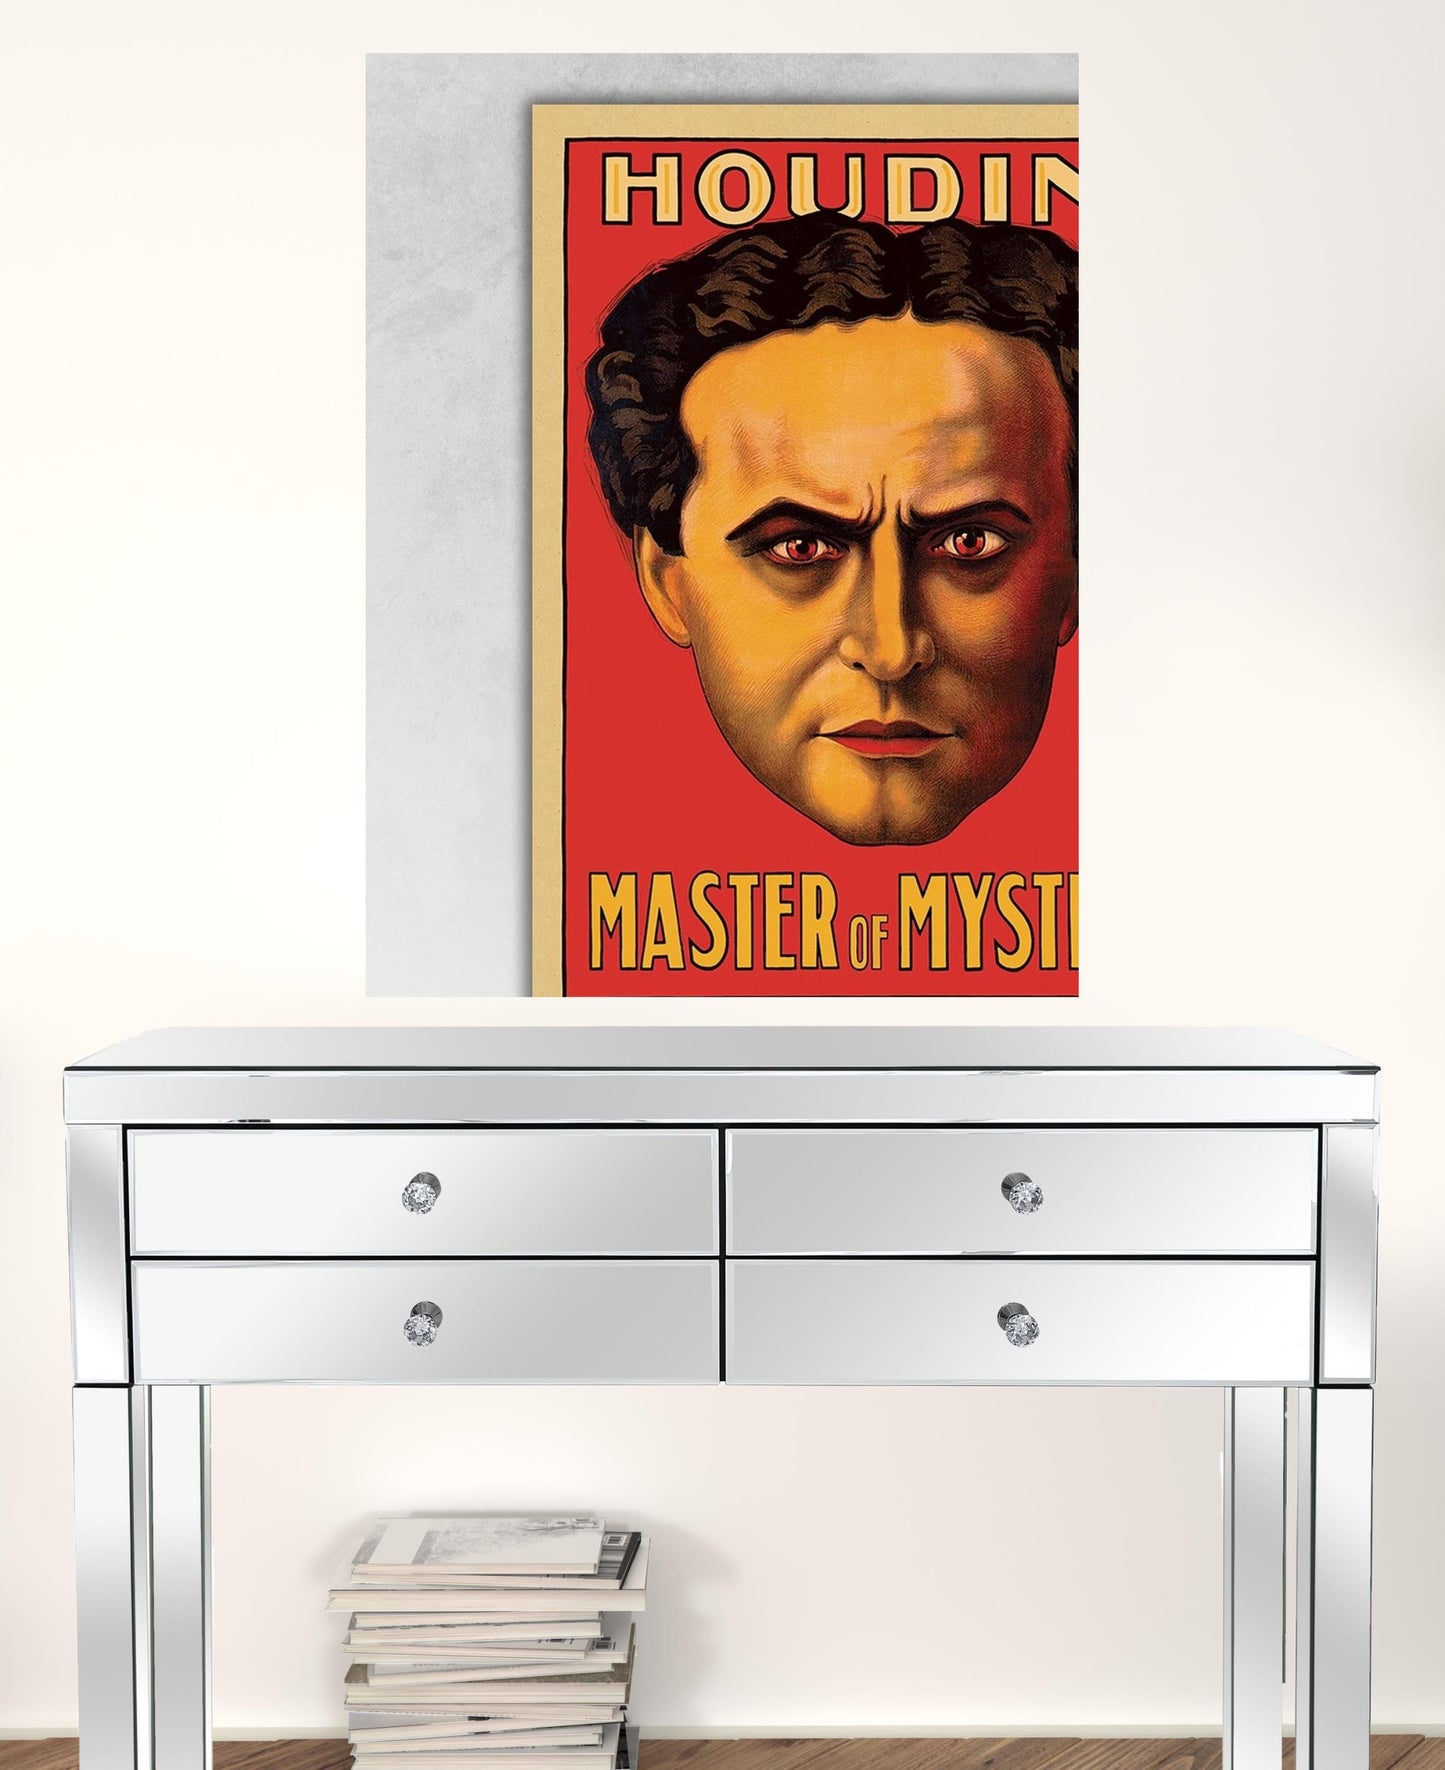 36" X 48" Houdini Master Of Mystery Vintage Magic Poster Wall Art